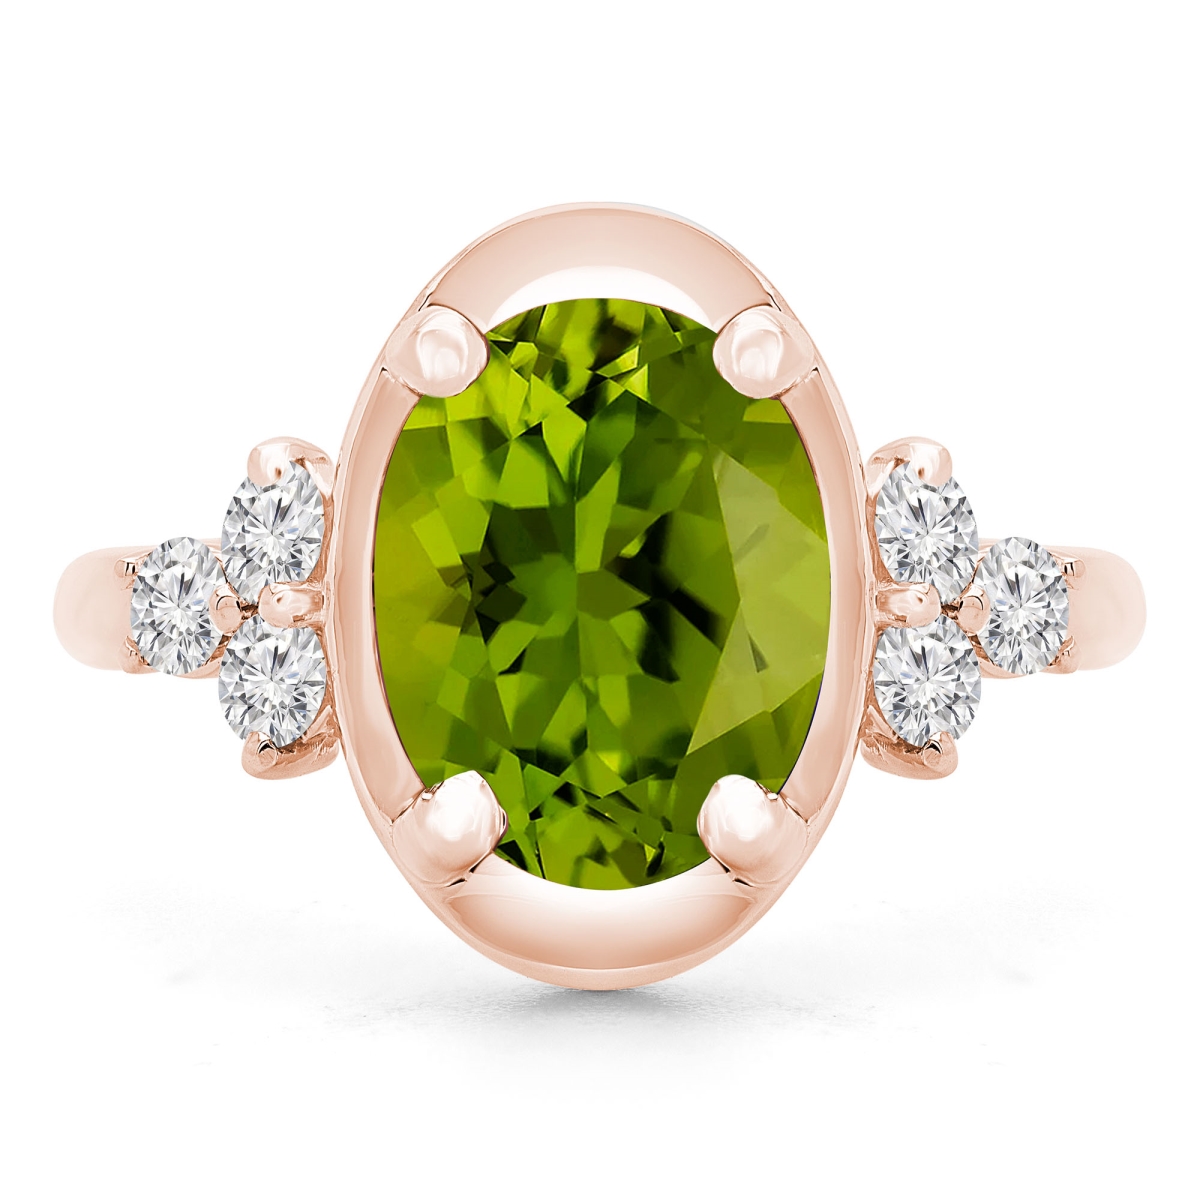 Picture of Majesty Diamonds MD190412-6 3.9 CTW Oval Green Peridot Cocktail Ring in 14K Rose Gold - Size 6